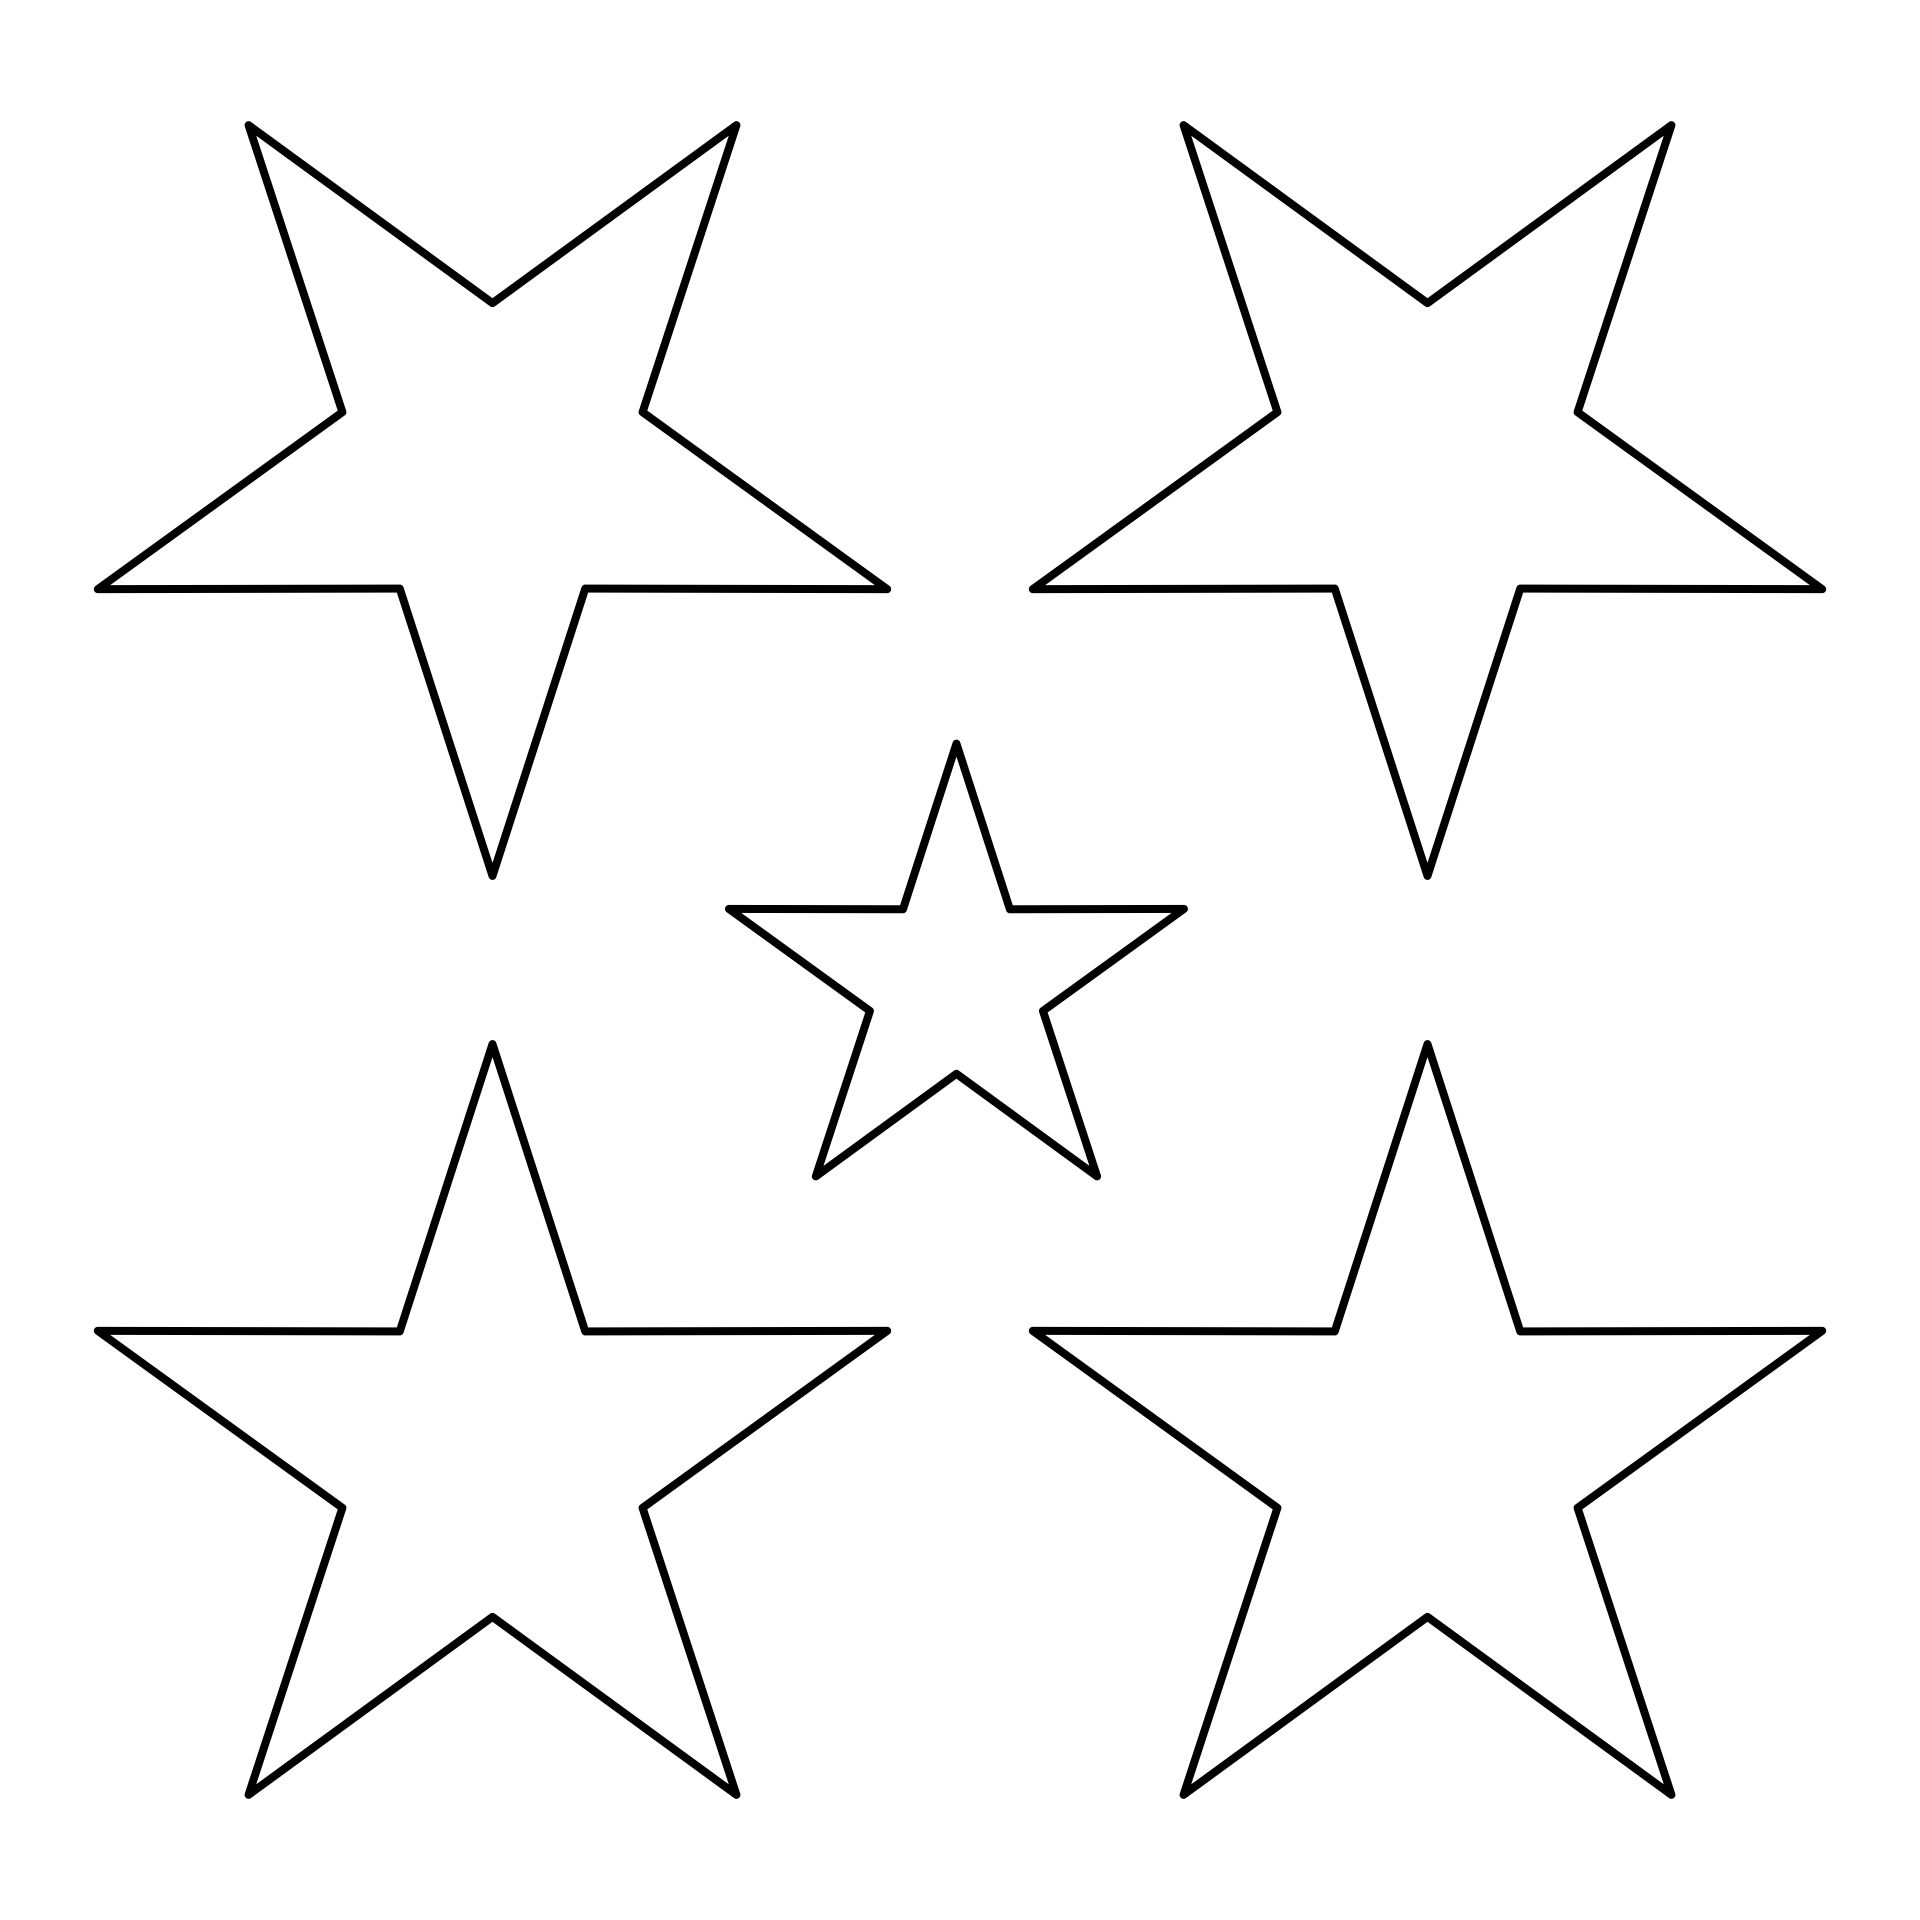 6-best-images-of-printable-cut-out-star-shape-free-printable-star